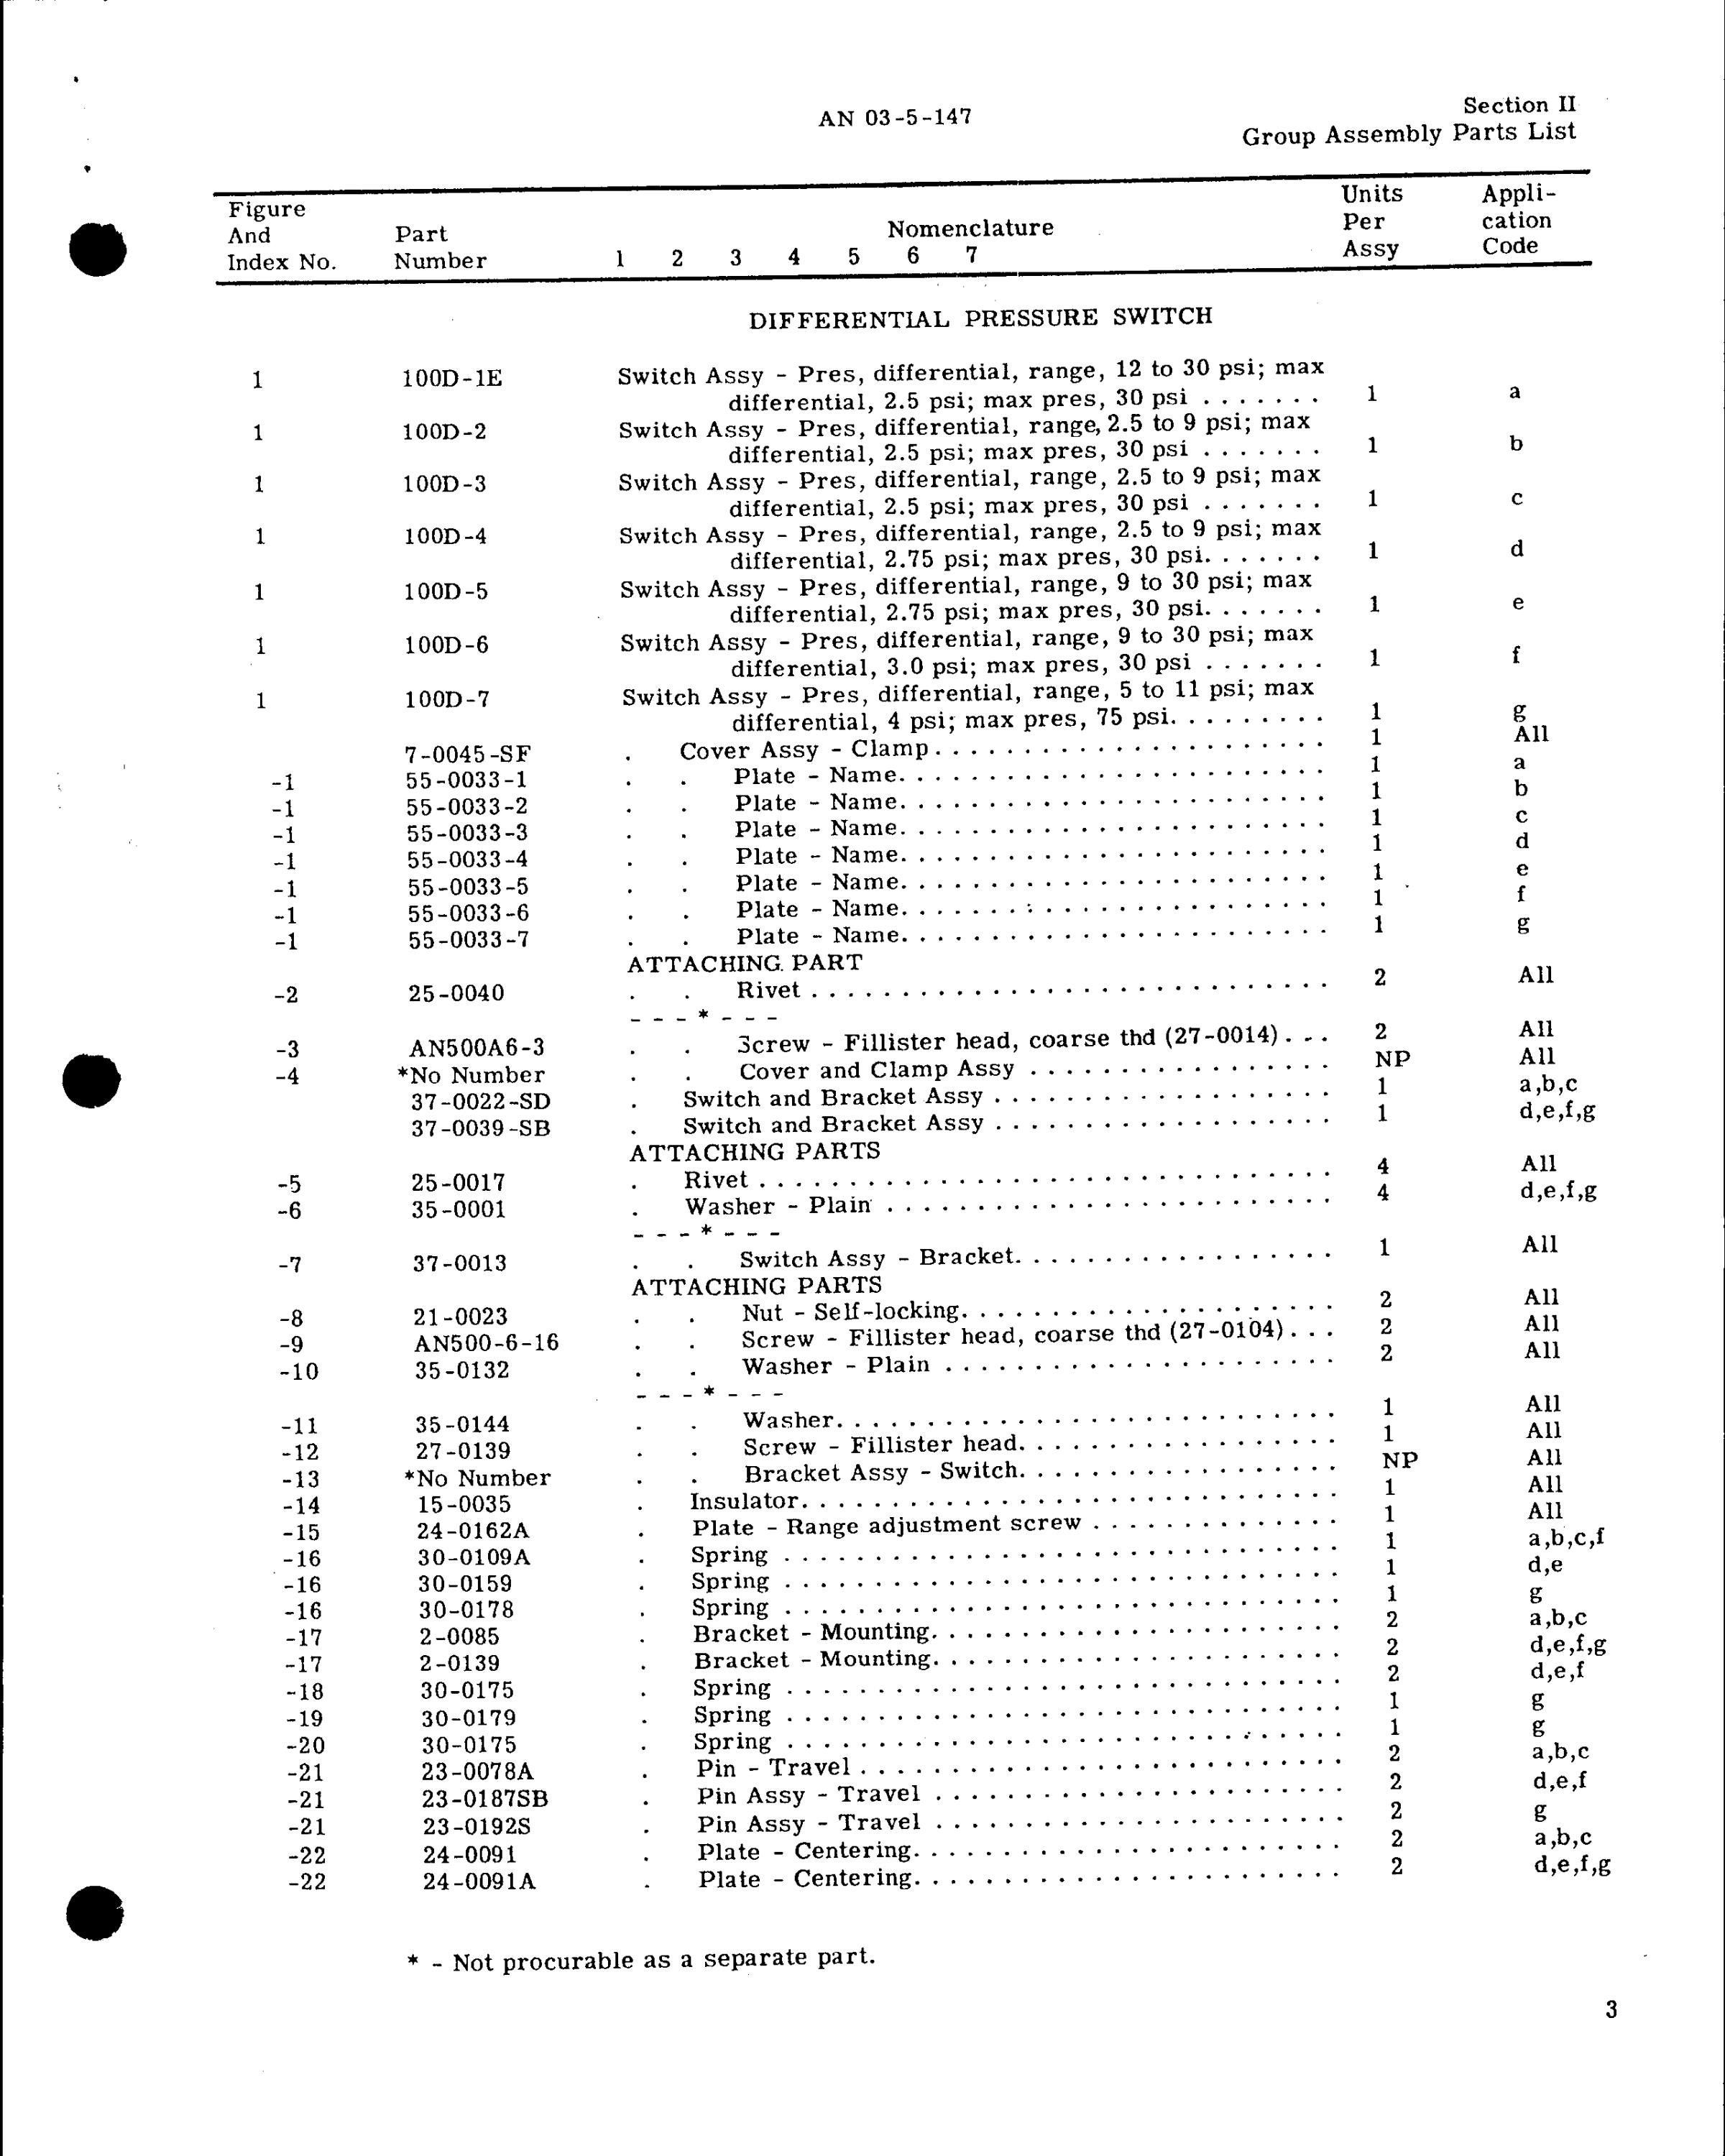 Sample page 5 from AirCorps Library document: Parts Catalog for Differential Pressure Switch (McQuay-Norris)